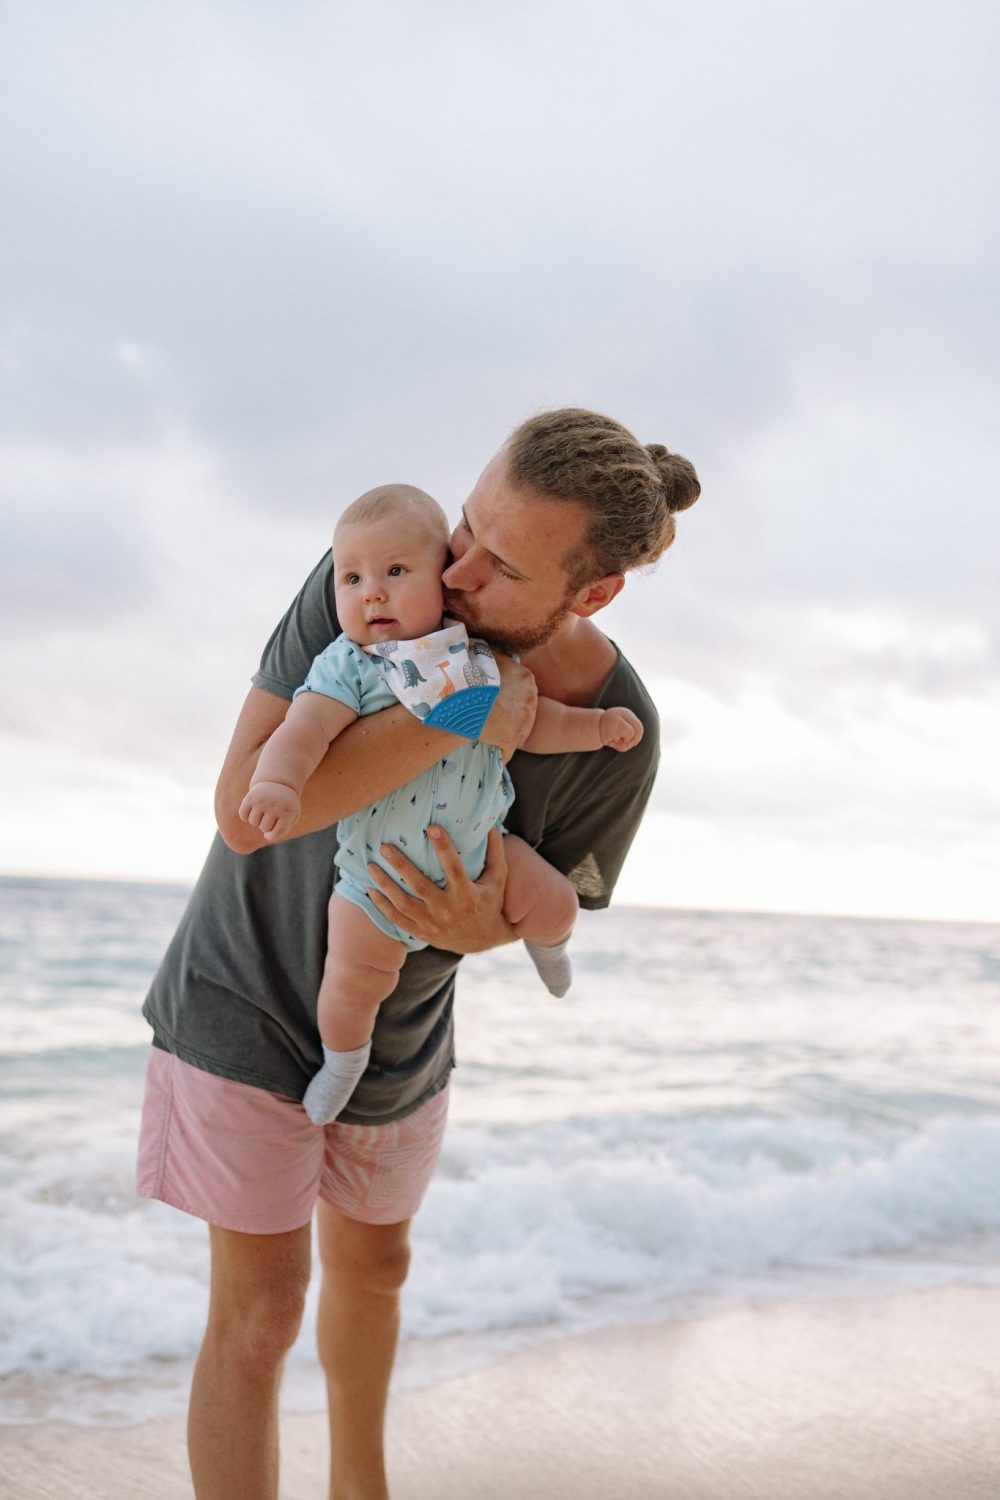 Dad and baby playing in the surf on a beach